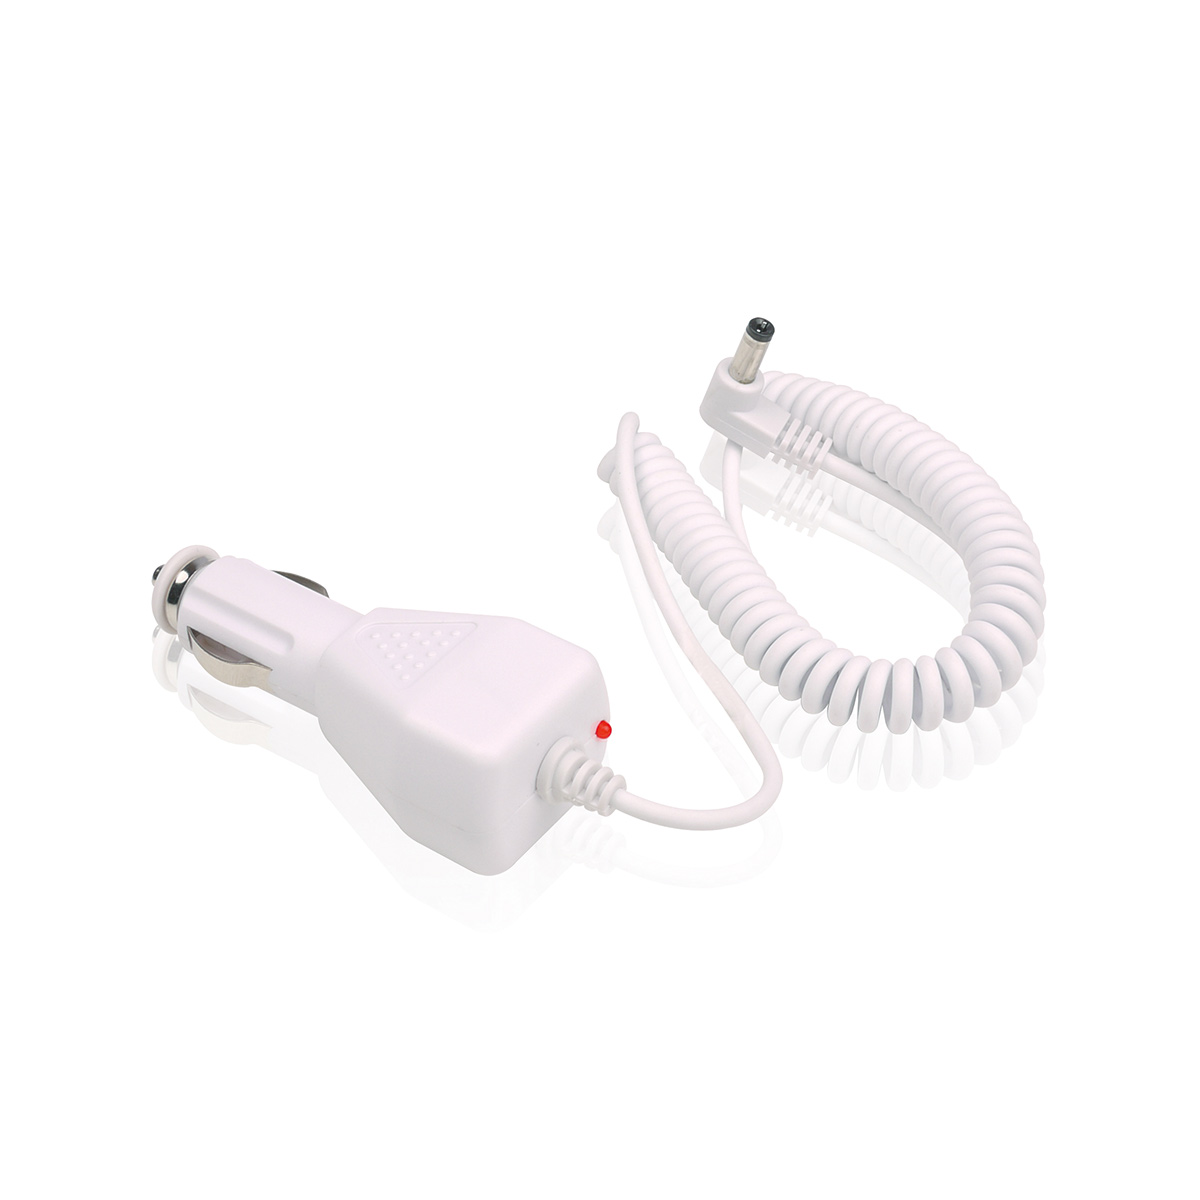 Picture of Dogtra CHARGER-BC5AUTO Auto Charger for 280C IQ YS300 & EF-3000 - White